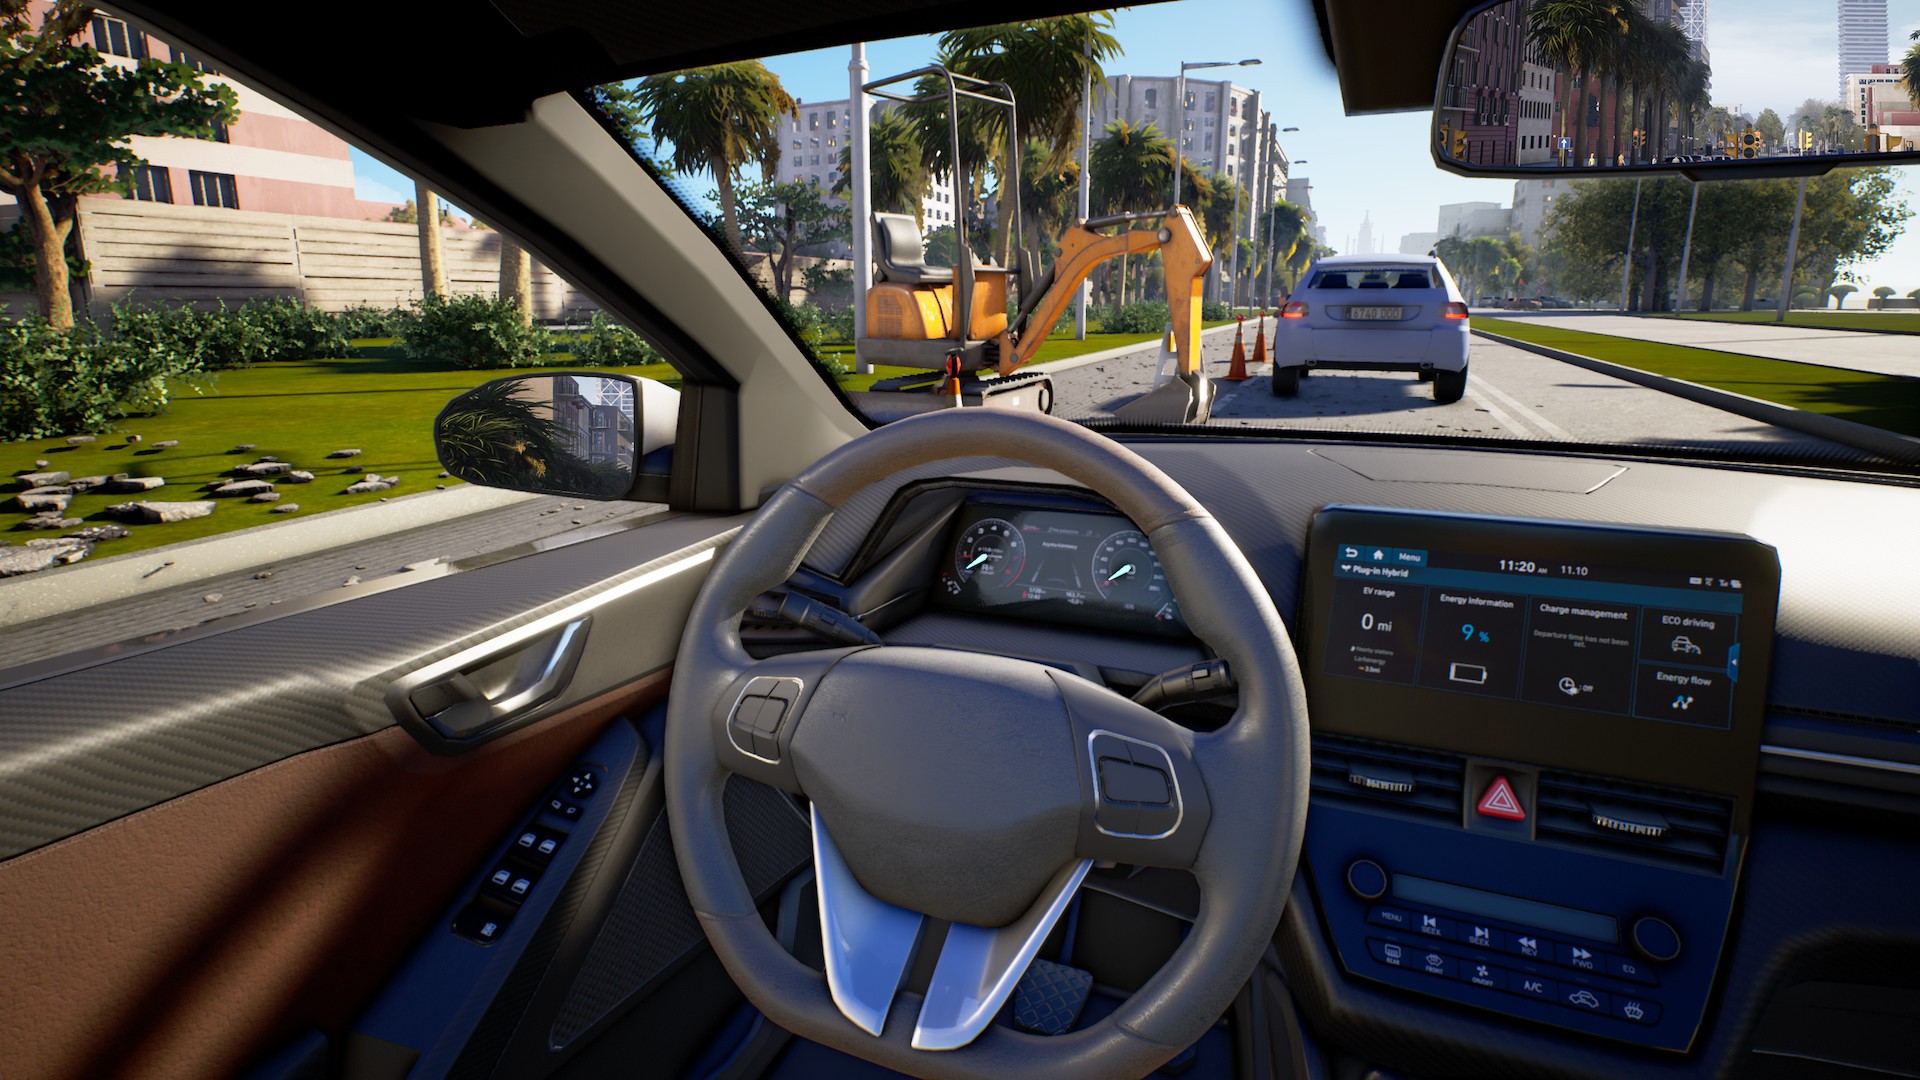 Buy Taxi Life: A City Driving Simulator Steam